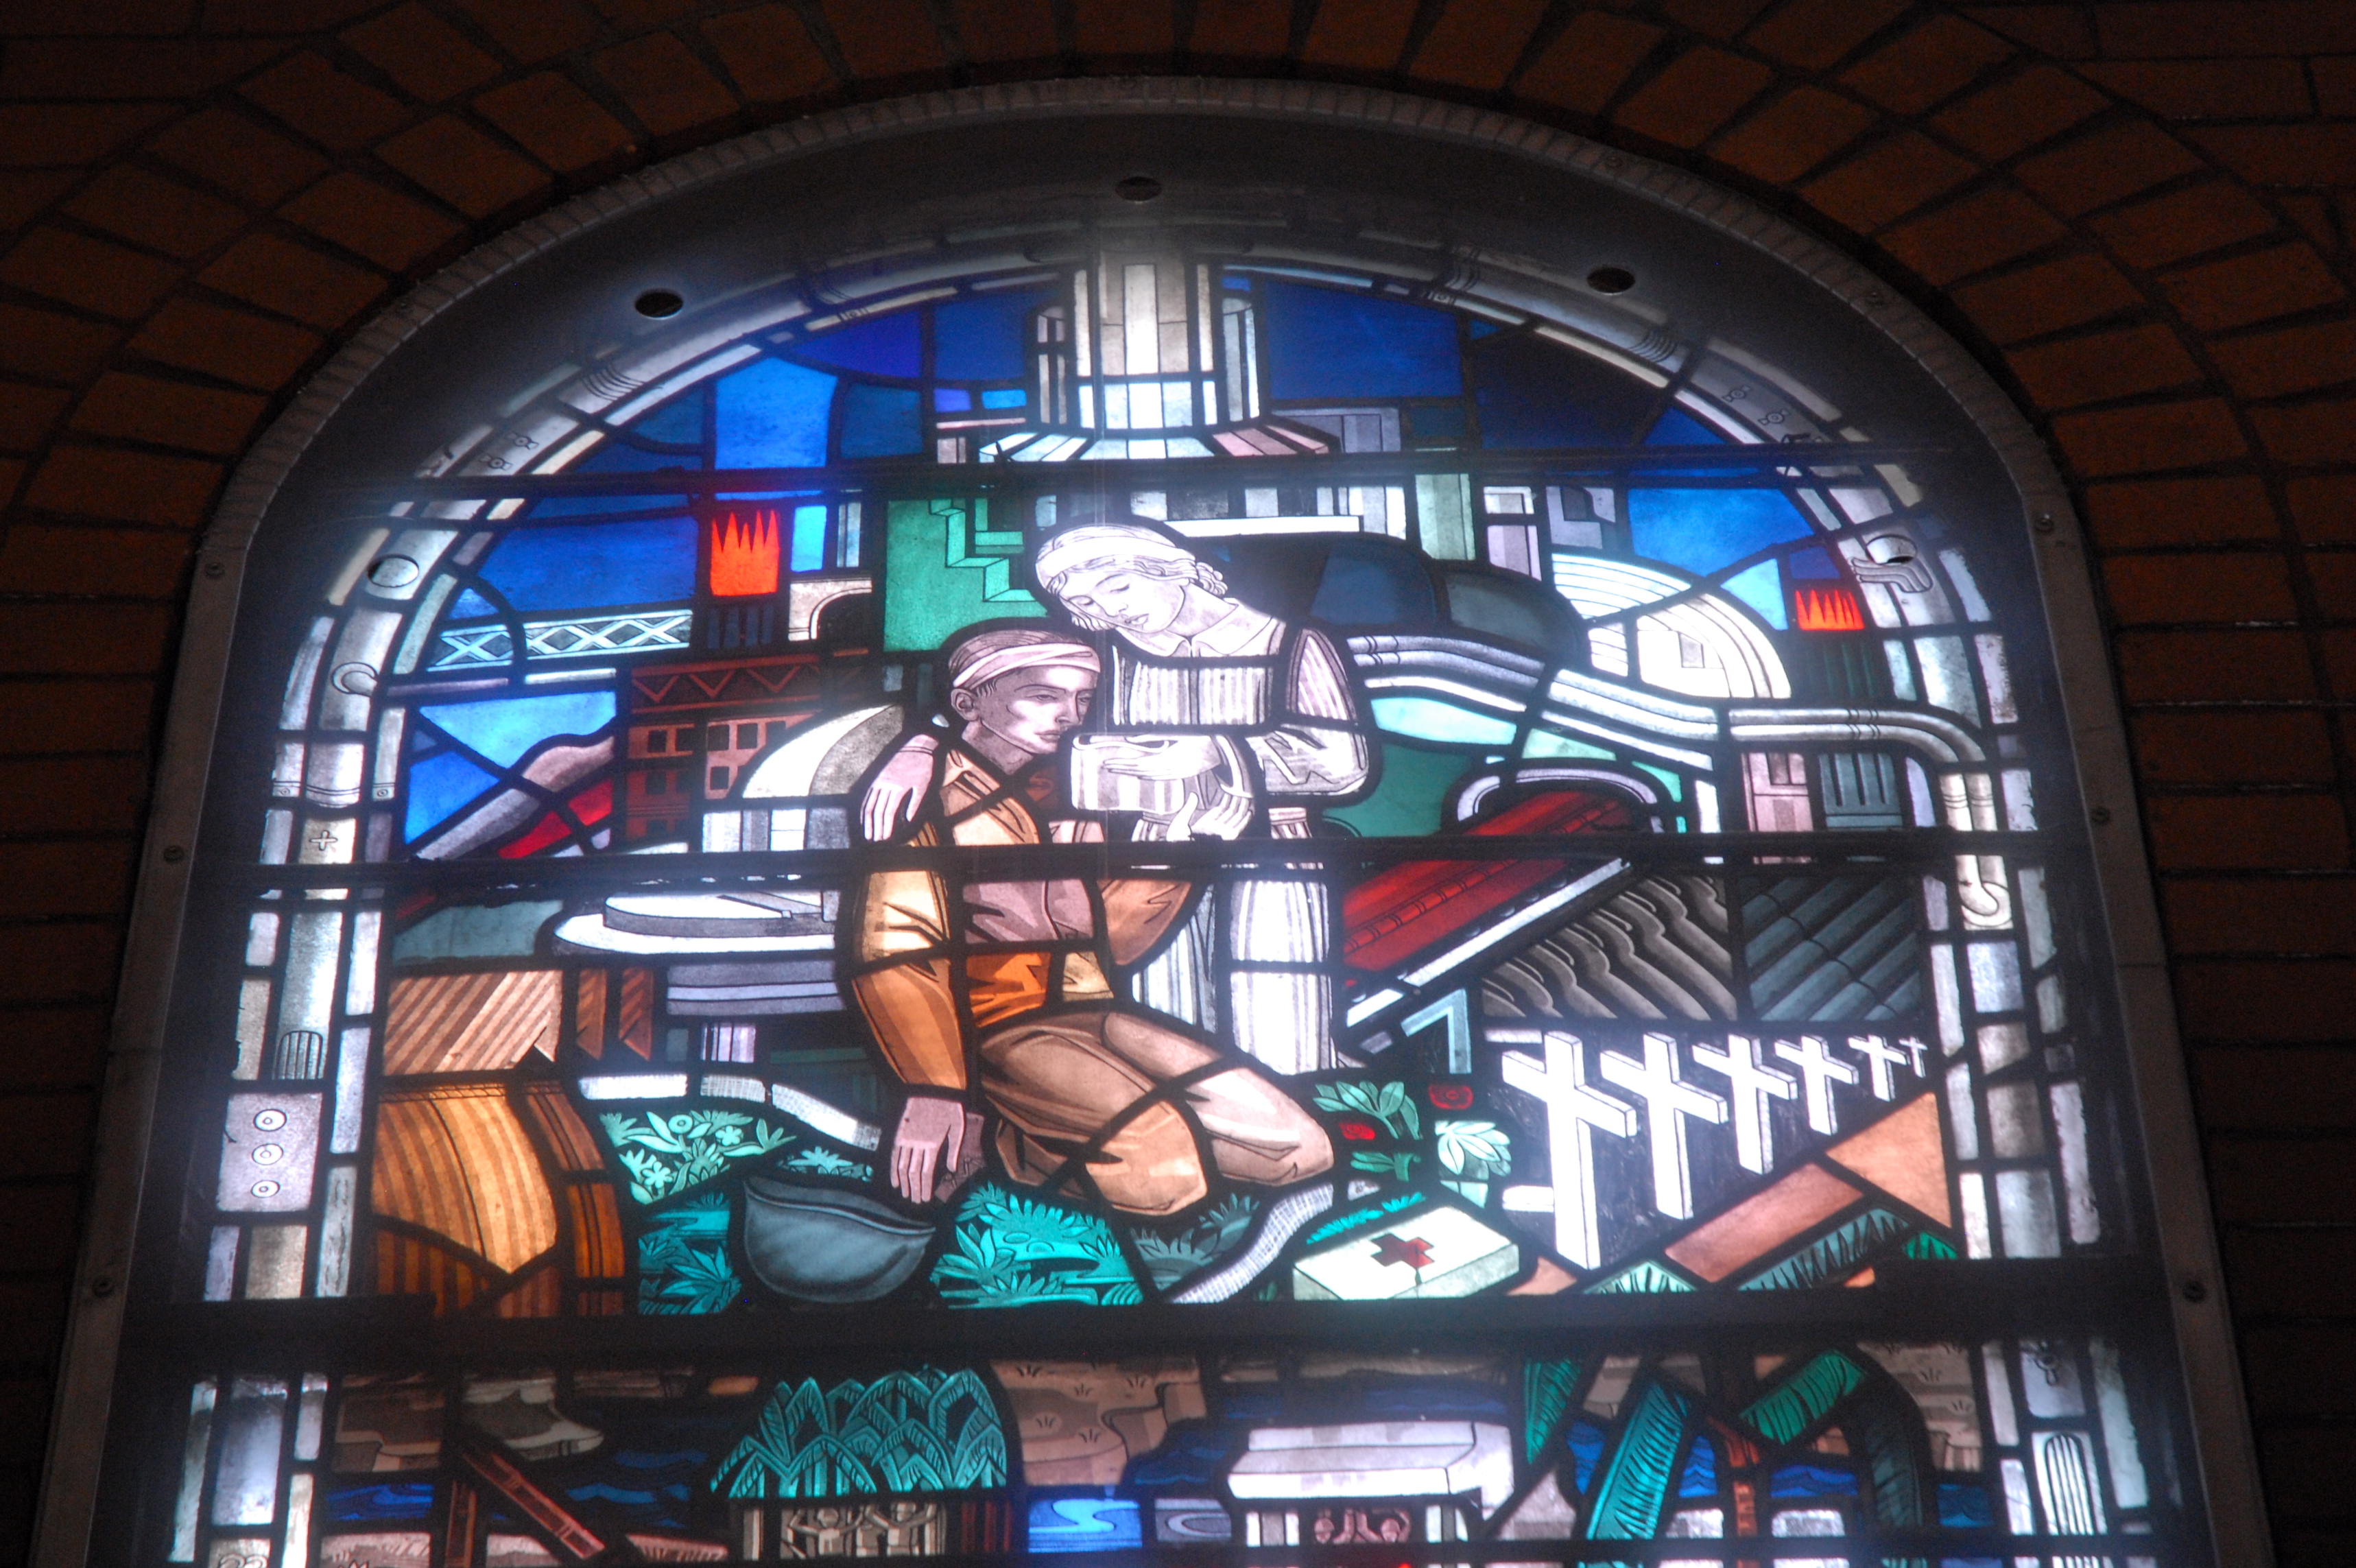 Top section of the World War II stained glass window created by Robert and Gertrude Metcalf.